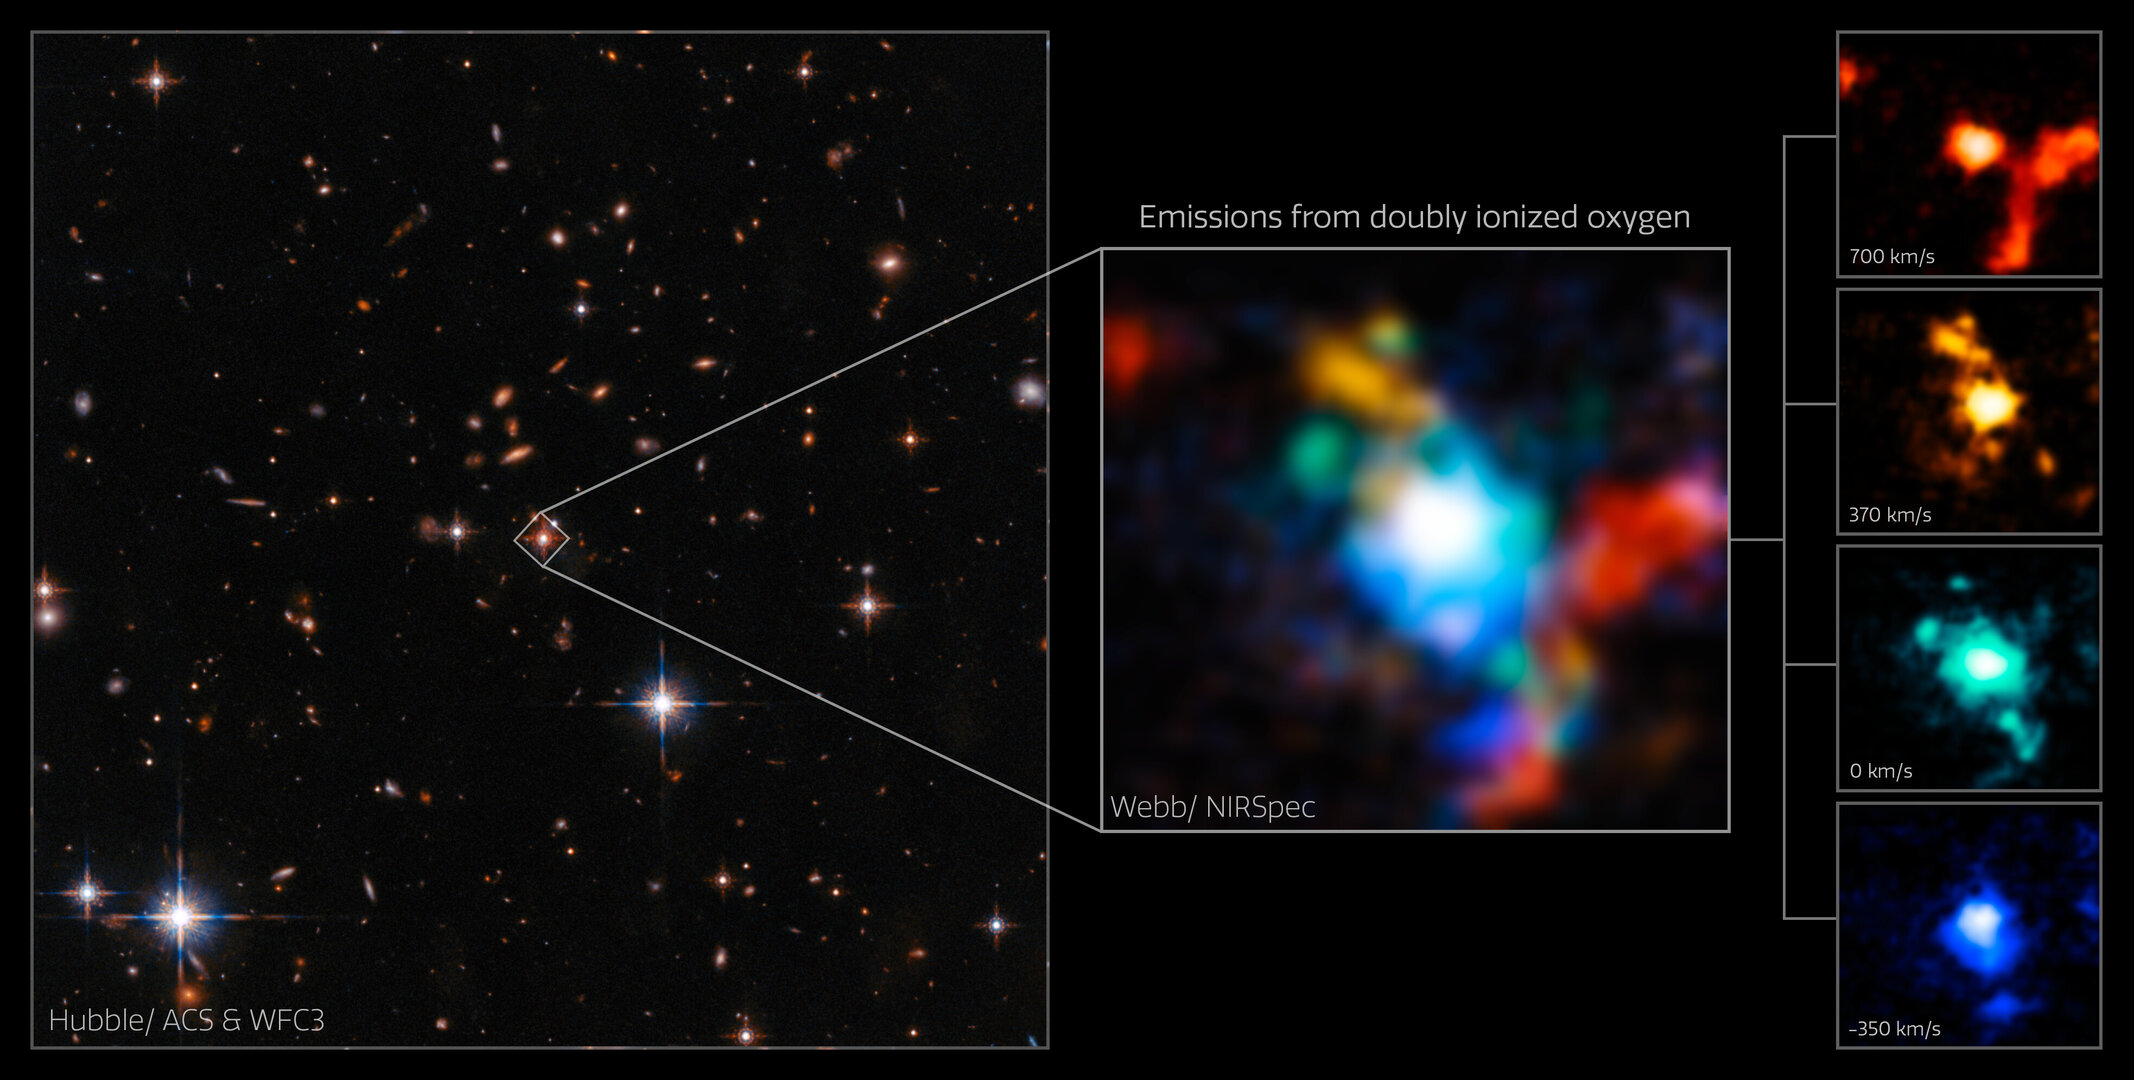 Webb's view around the extremely red quasar SDSS J165202.64+172852.3